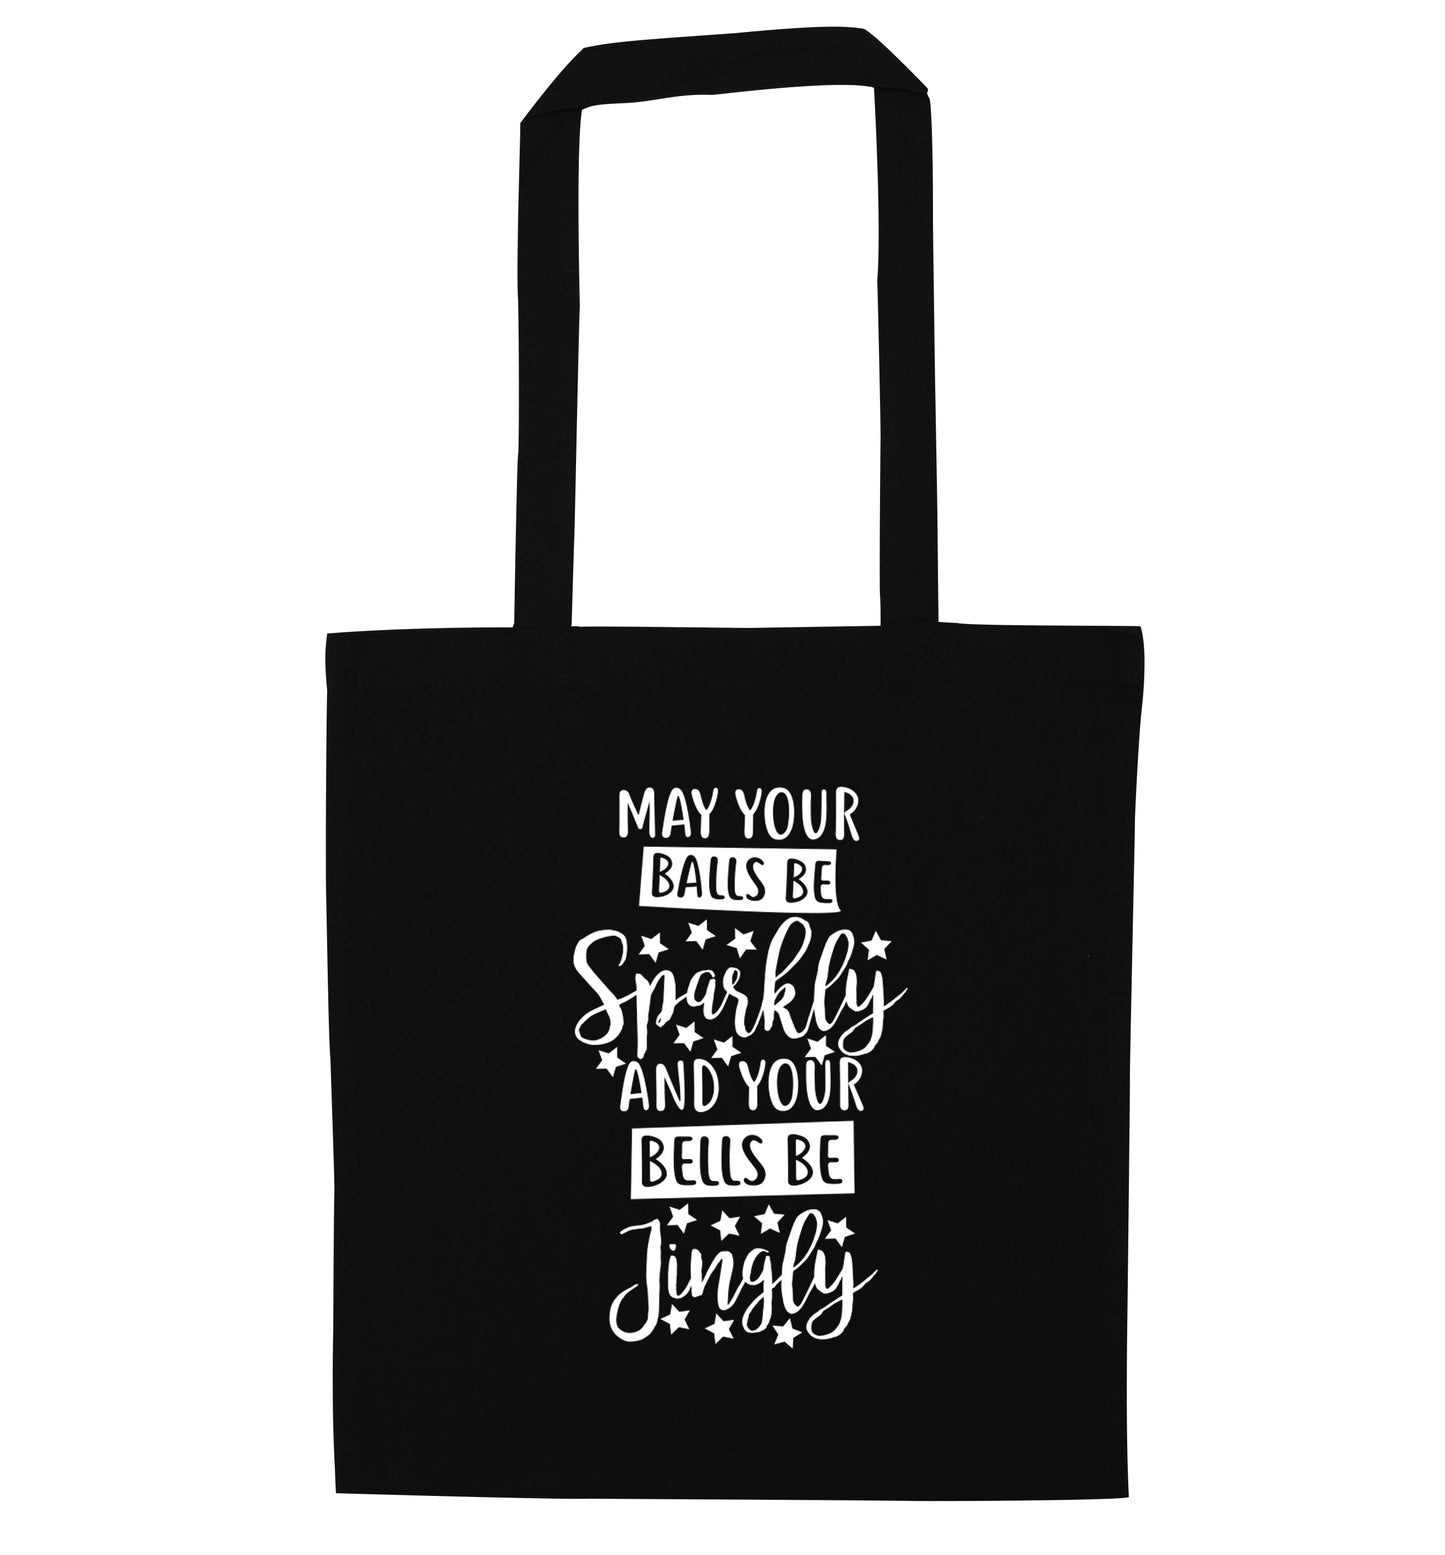 May your balls be sparkly and your bells be jingly black tote bag